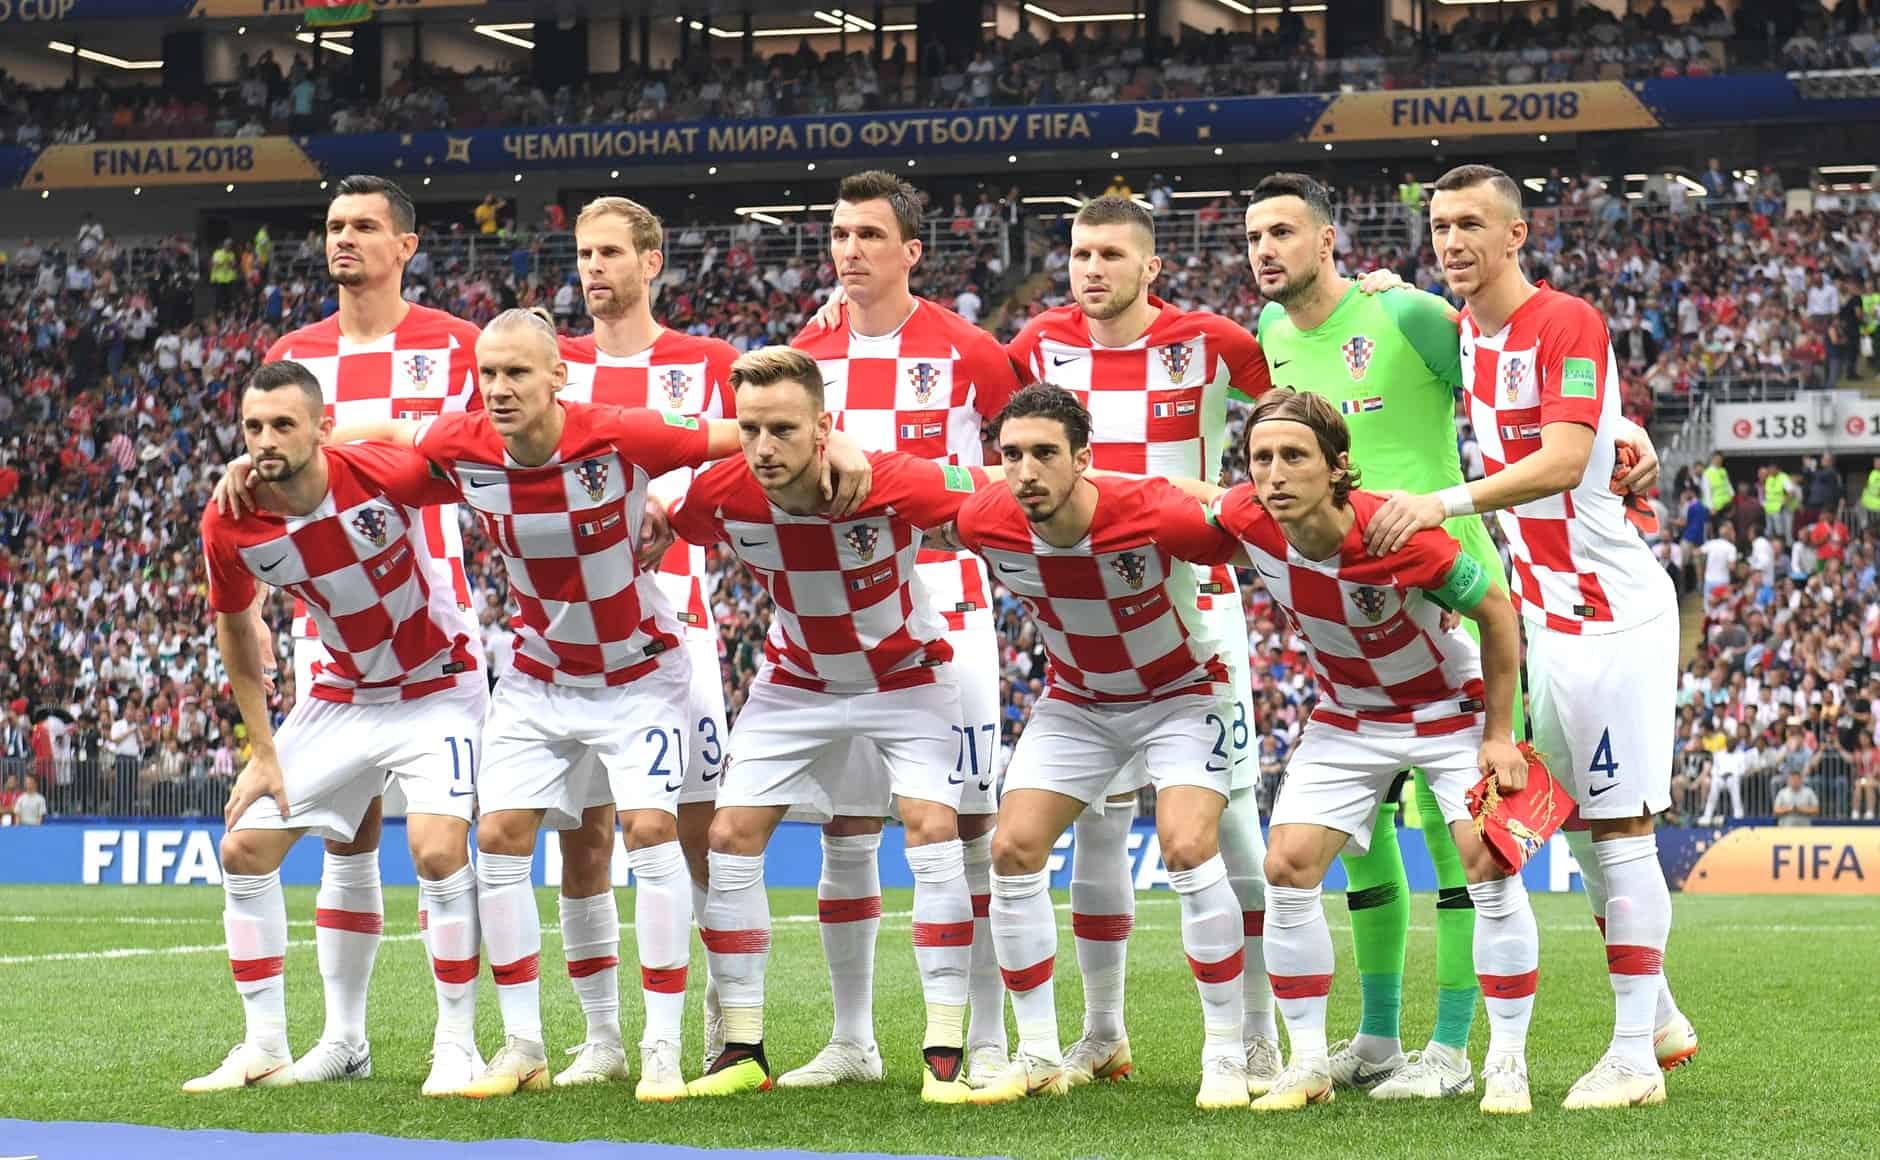 Croatia at Qatar 2022 How to Watch the A-Team in the World Cup